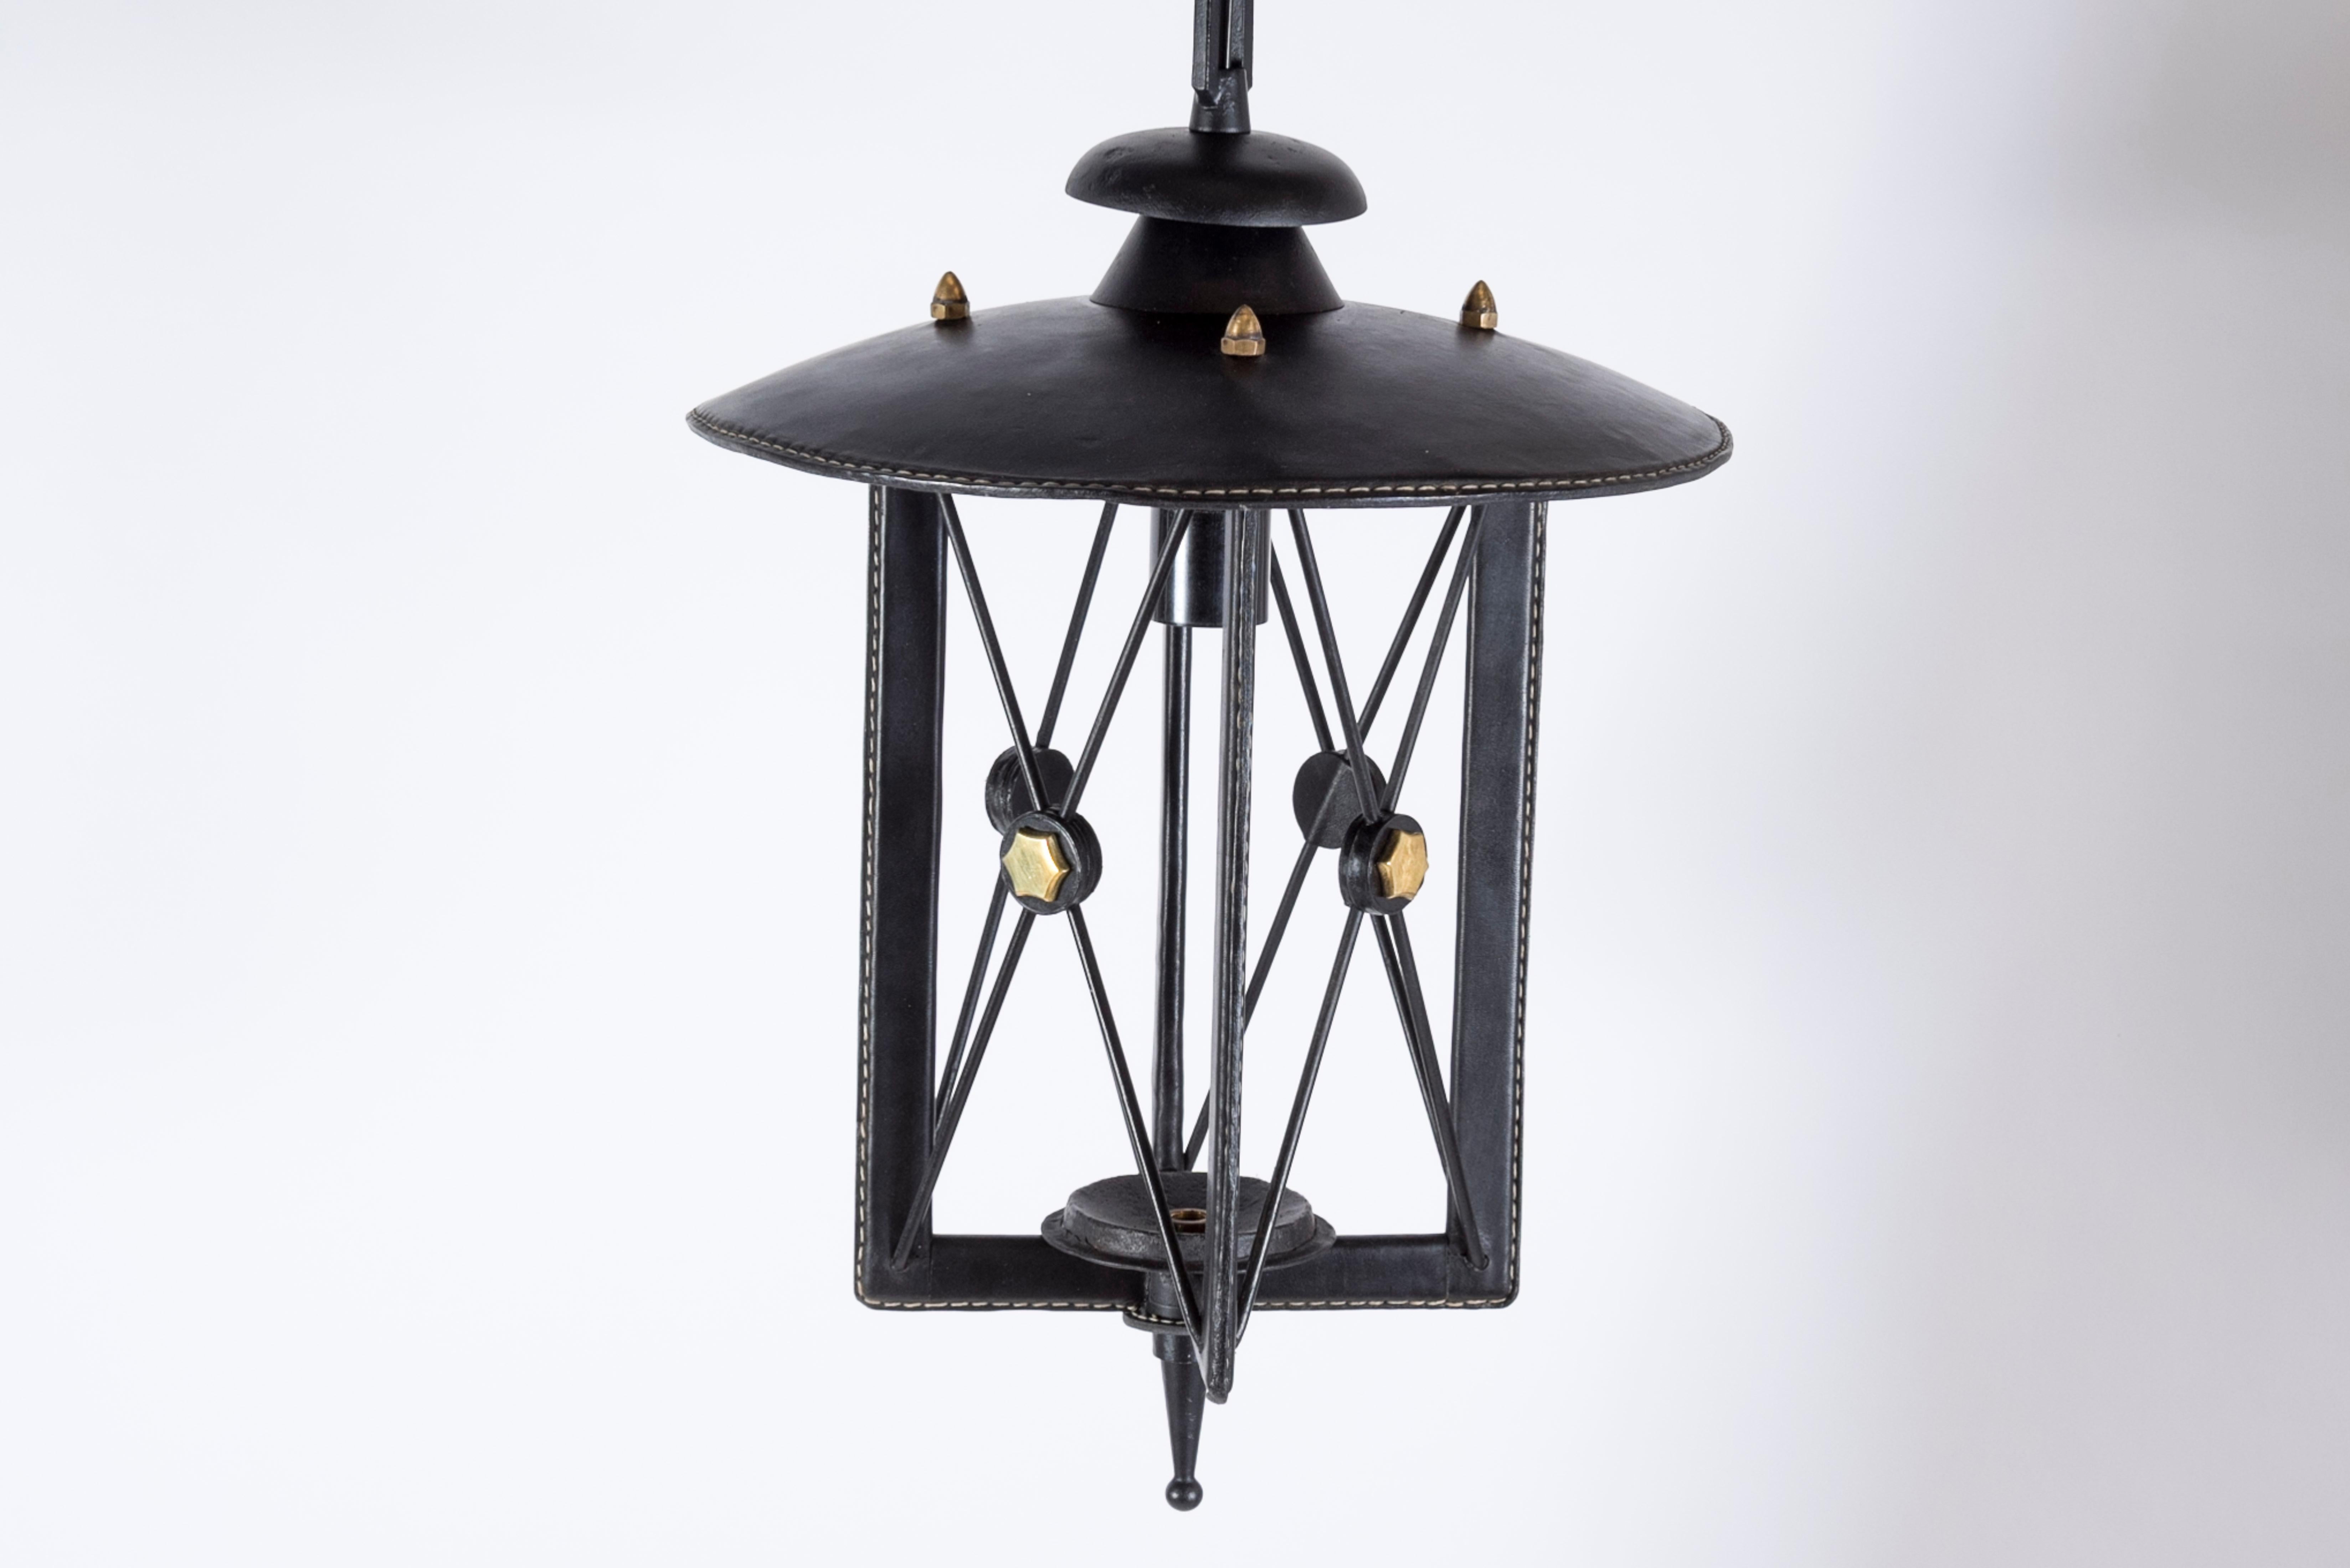 1950's stitched leather lantern by Jacques Adnet
Black leather
France.